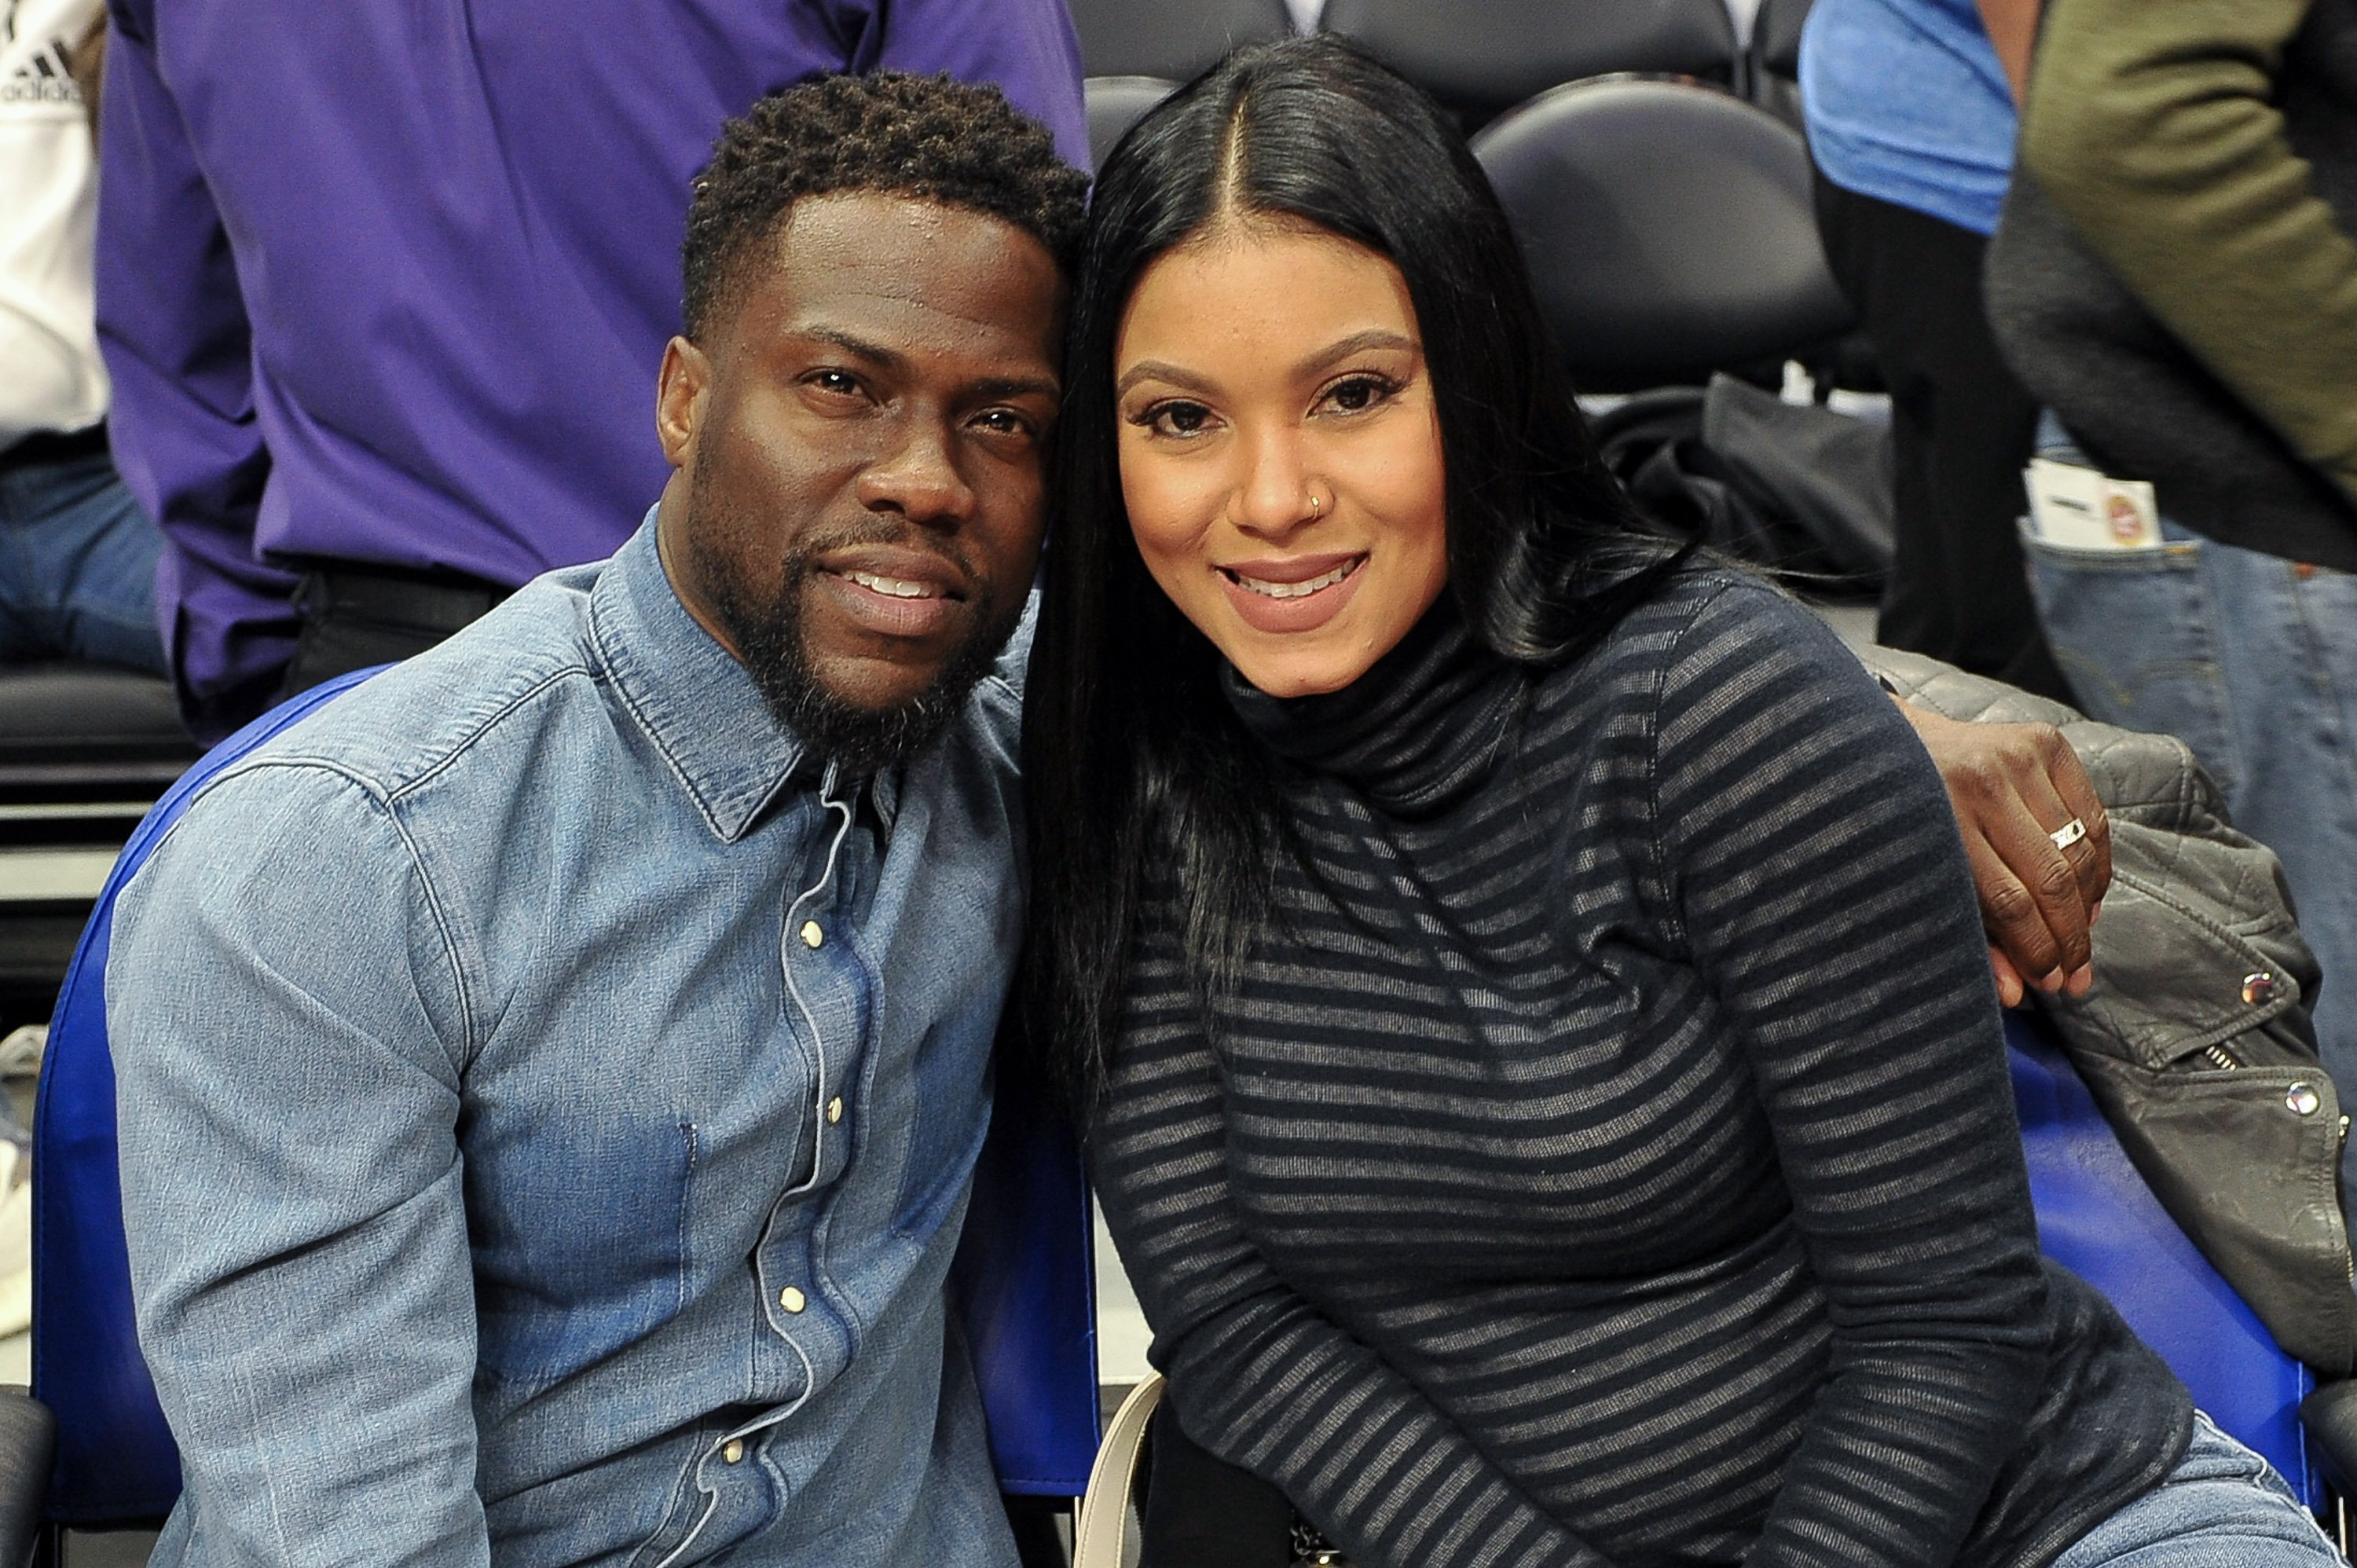 Kevin and Eniko Hart at a basketball game at Staples Center on January 22, 2018 in Los Angeles, California | Photo: Getty Images